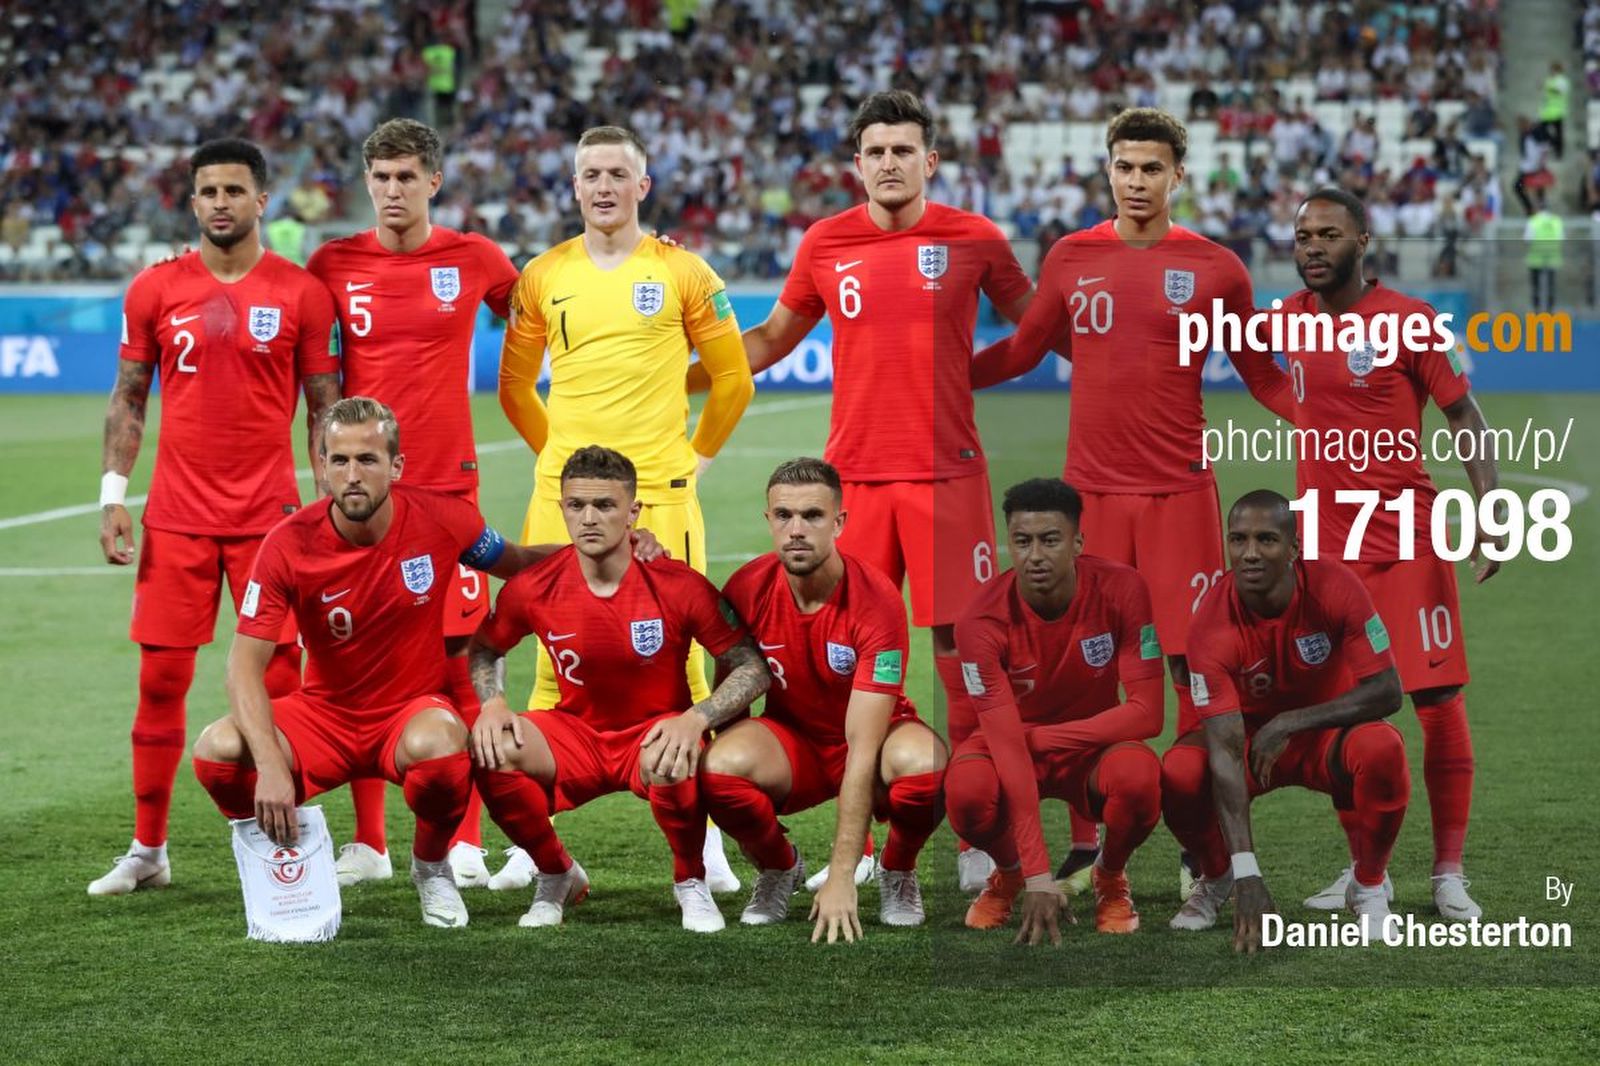 England line up before their match against Tunisia